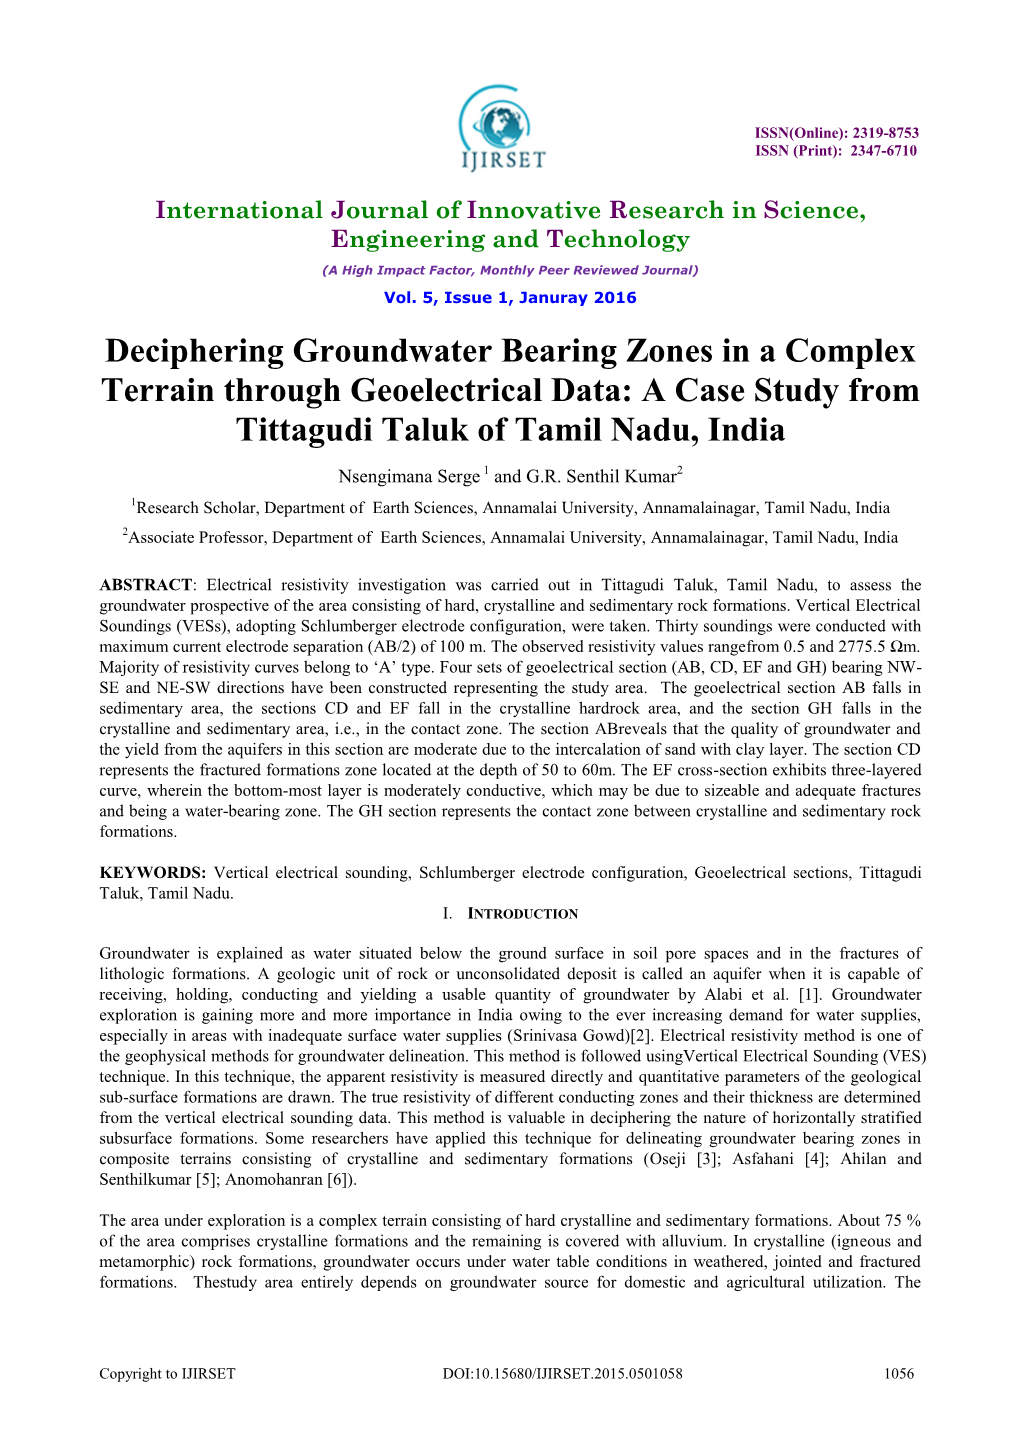 Deciphering Groundwater Bearing Zones in a Complex Terrain Through Geoelectrical Data: a Case Study from Tittagudi Taluk of Tamil Nadu, India